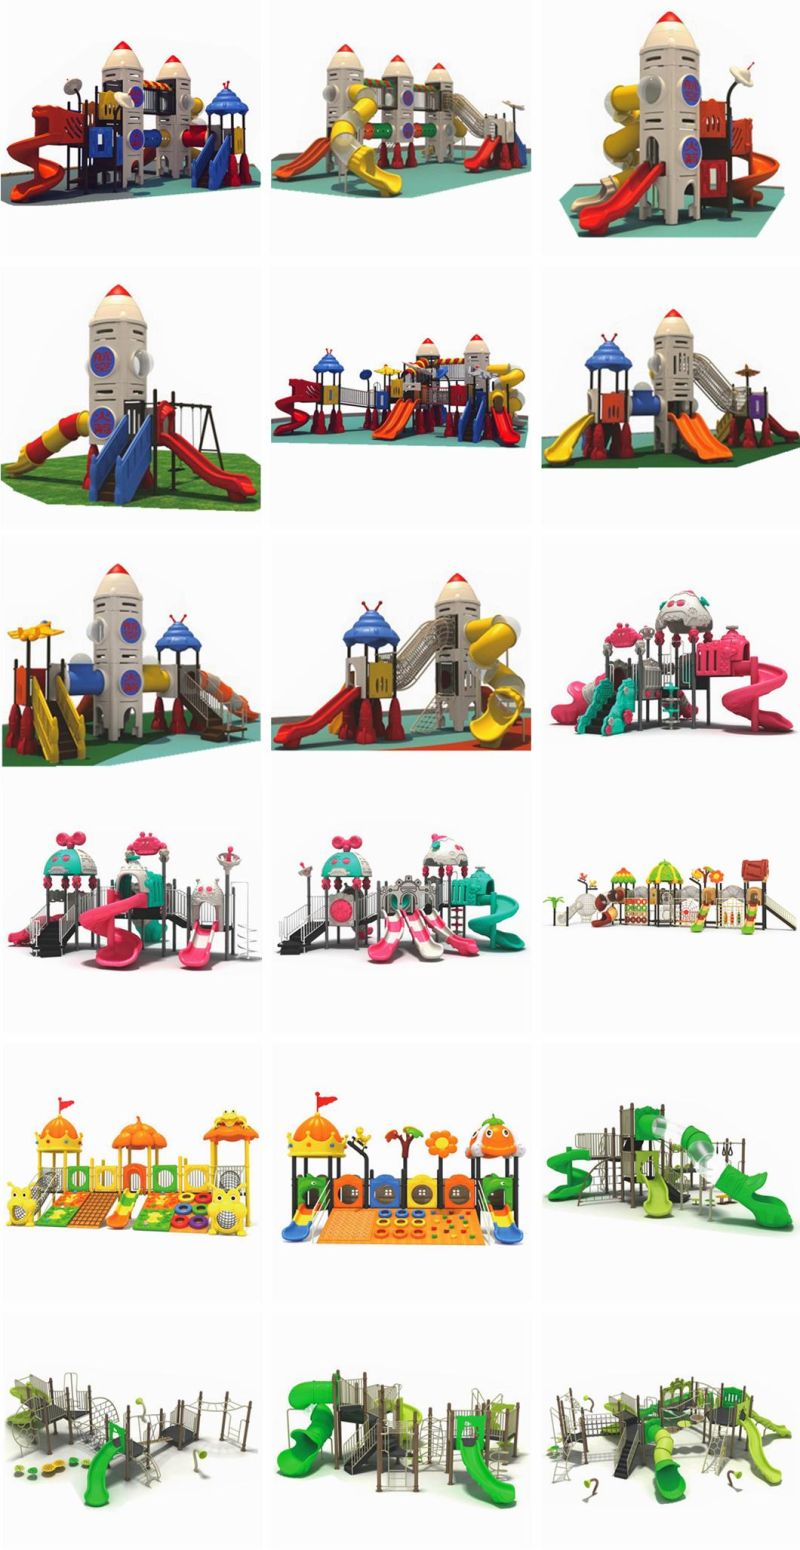 Outdoor Playground Equipment Kids Plastic Slide Environmental Protection Material